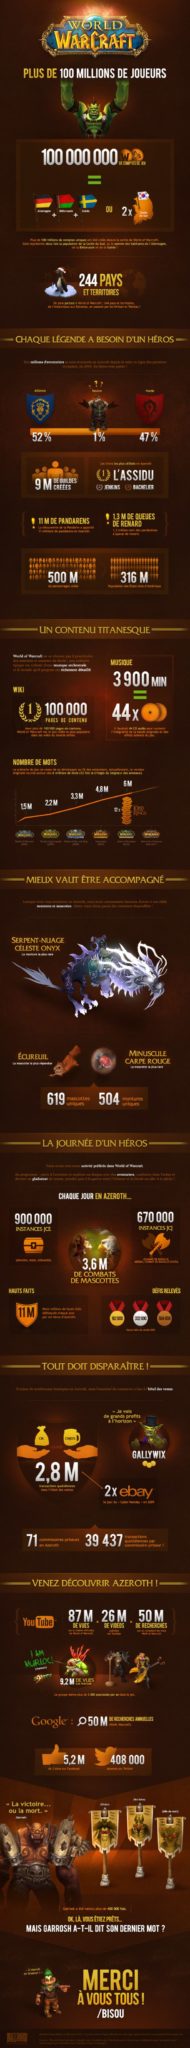 WoW_Infographic-2014_FR